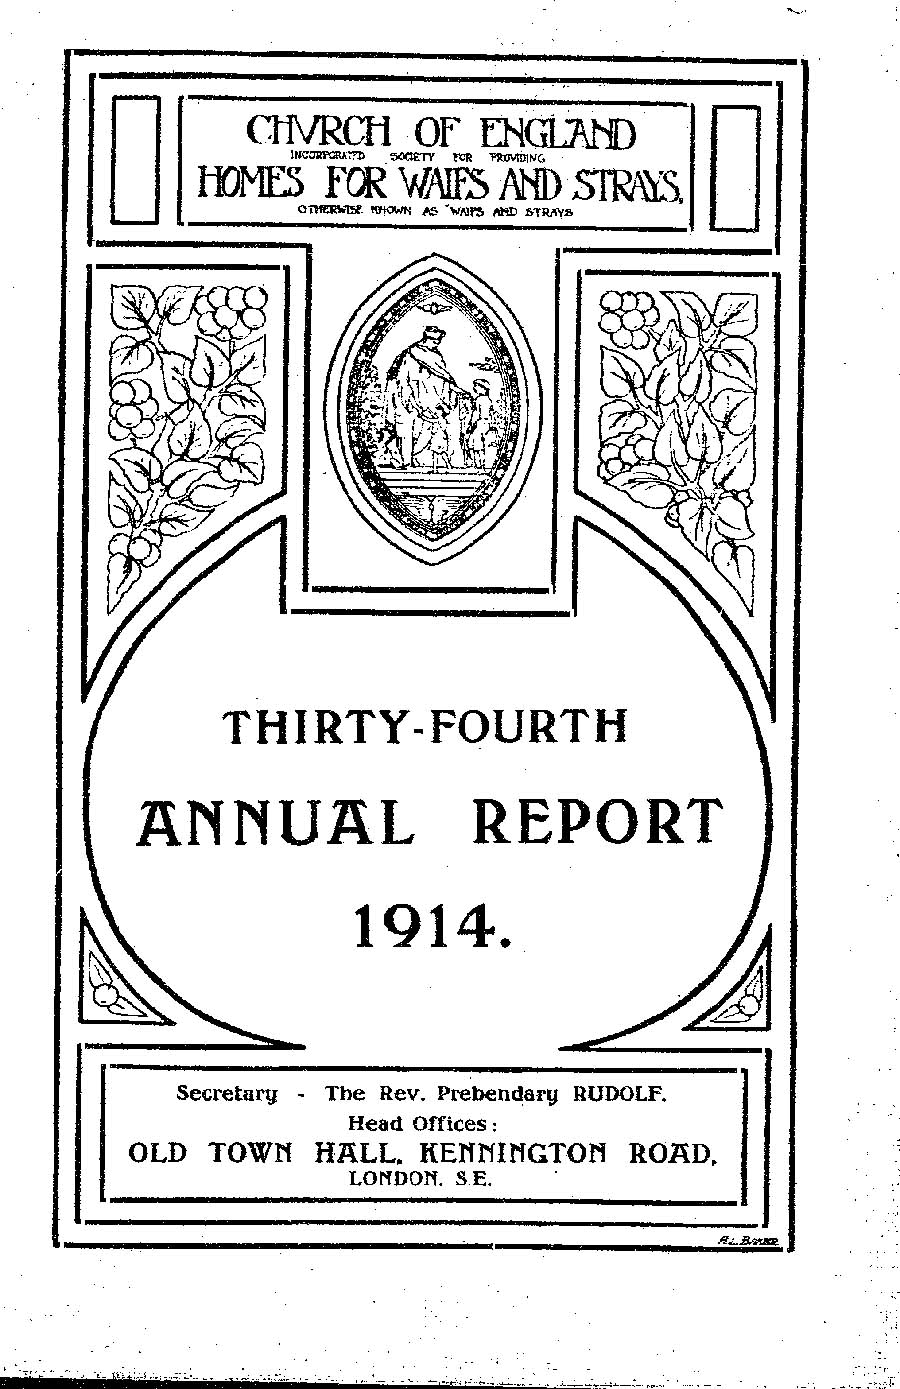 Annual Report 1914 - page 1